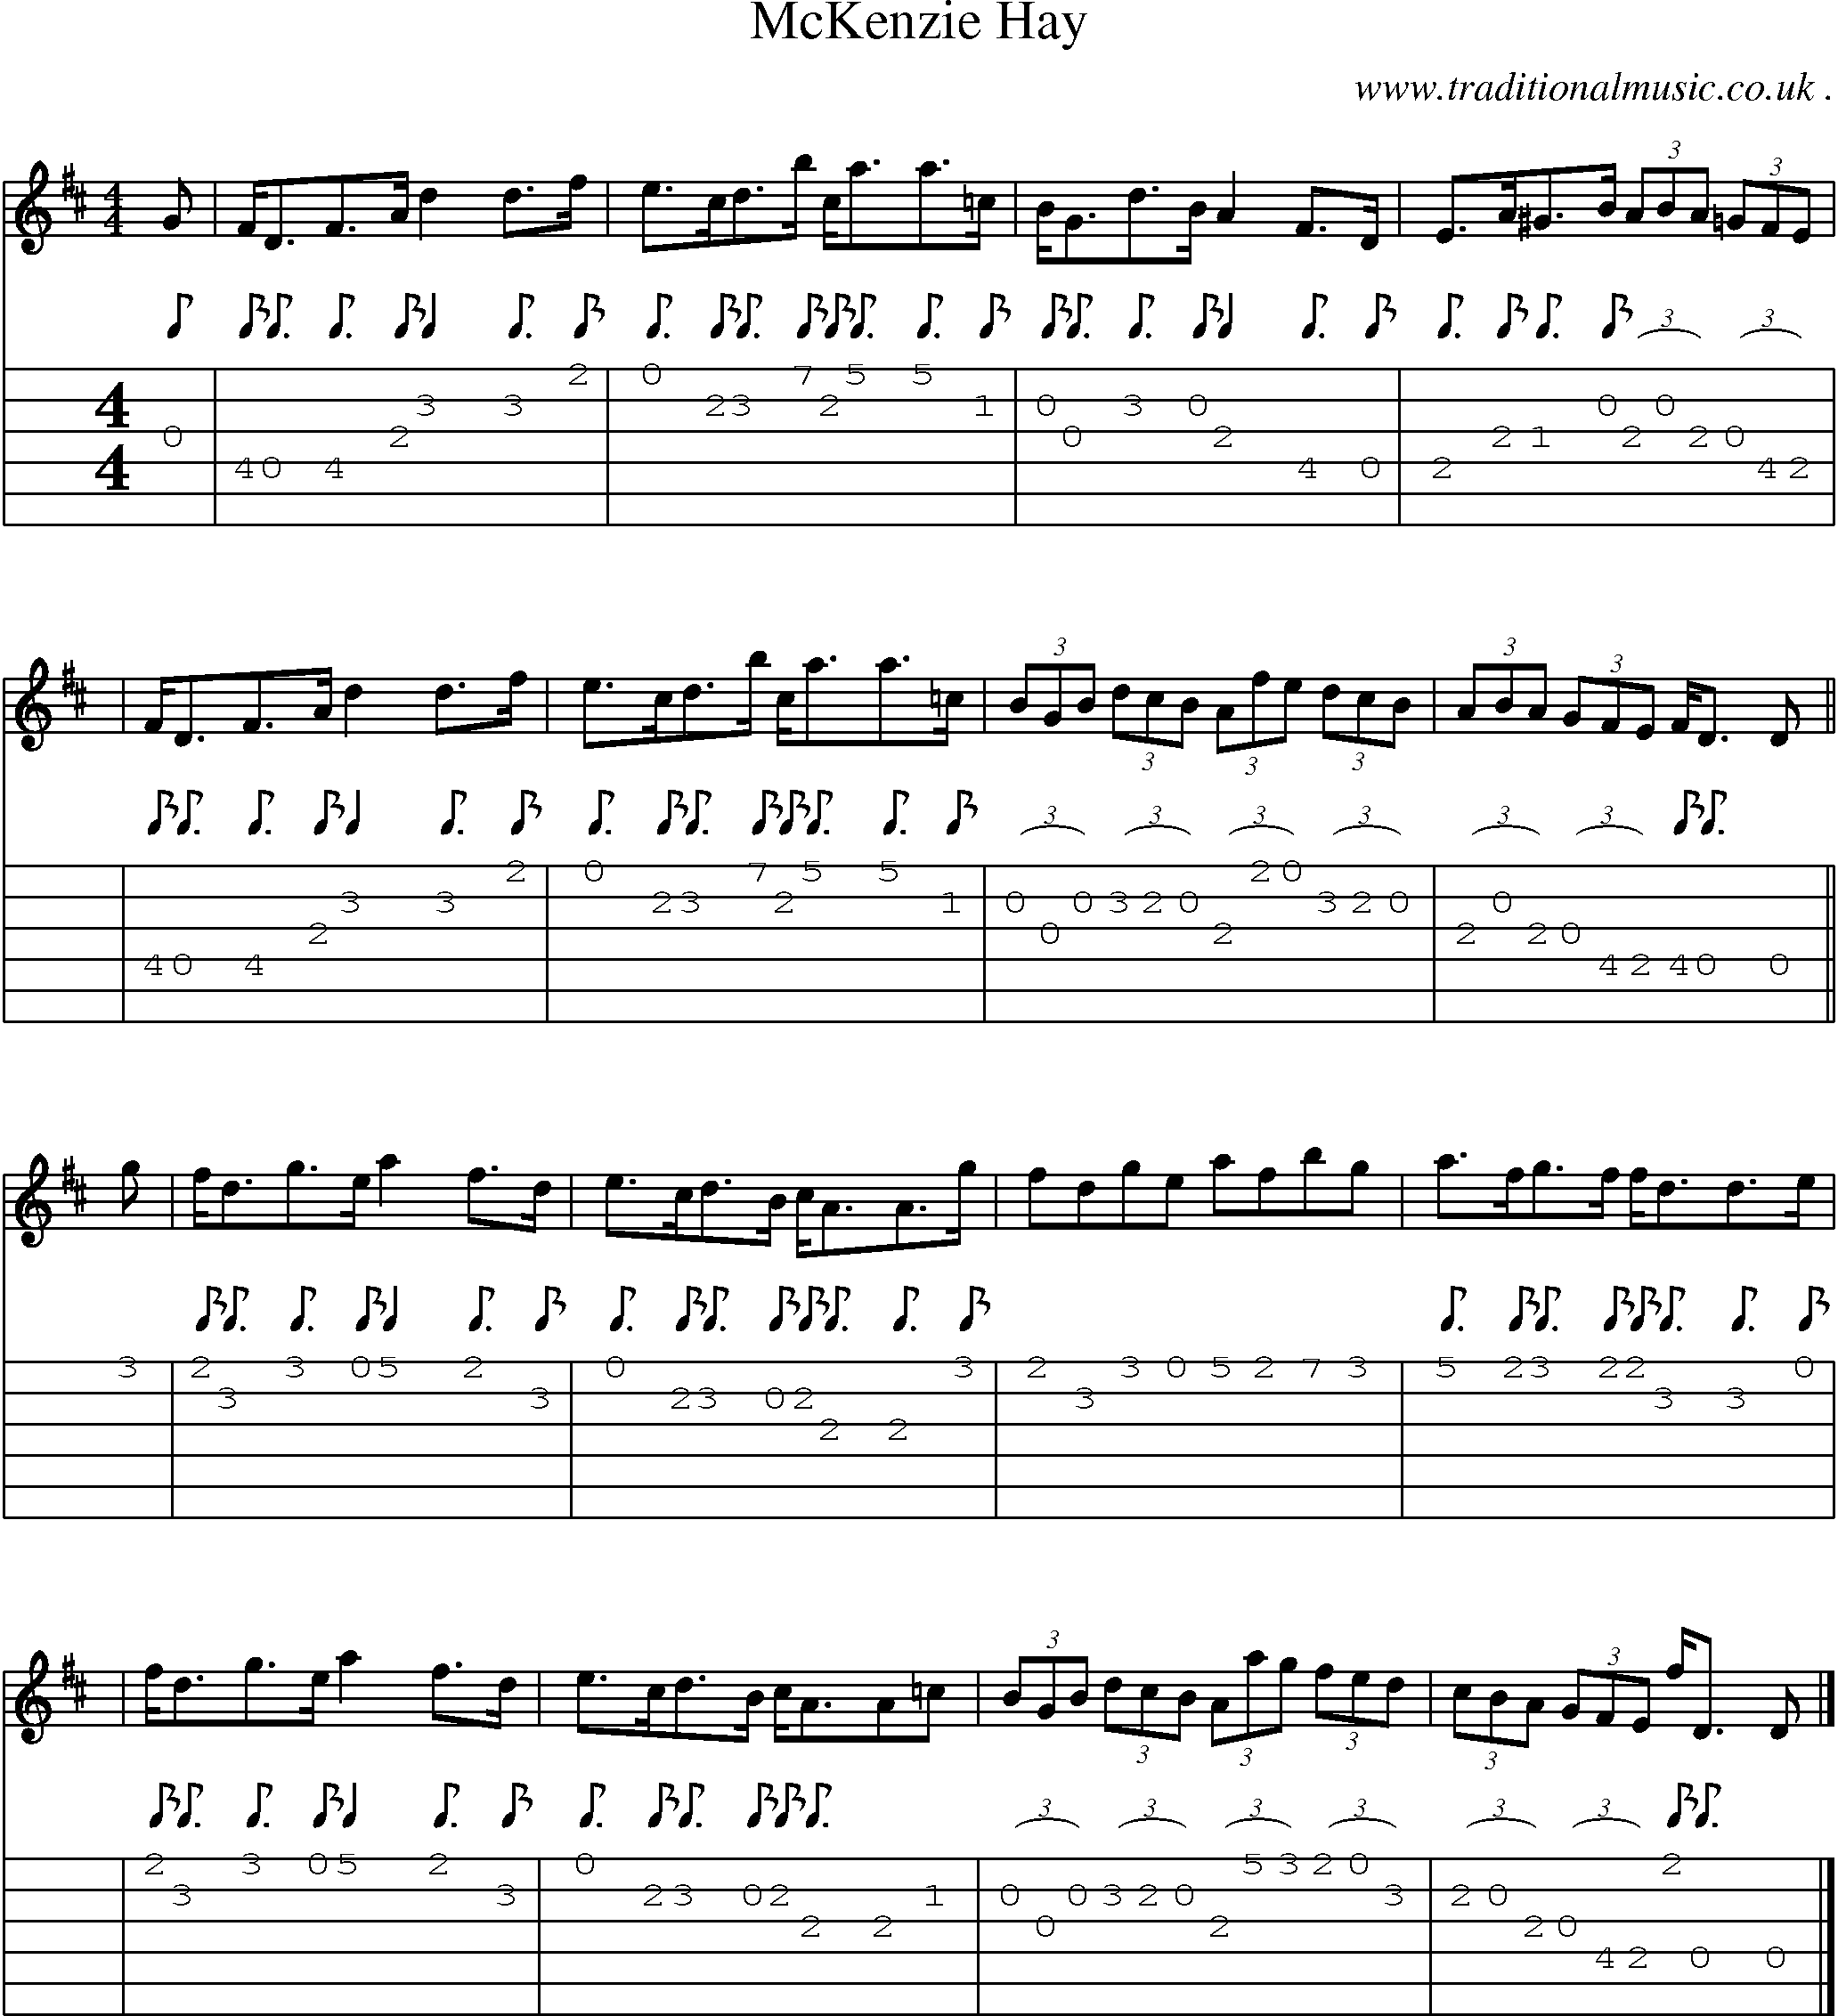 Sheet-music  score, Chords and Guitar Tabs for Mckenzie Hay